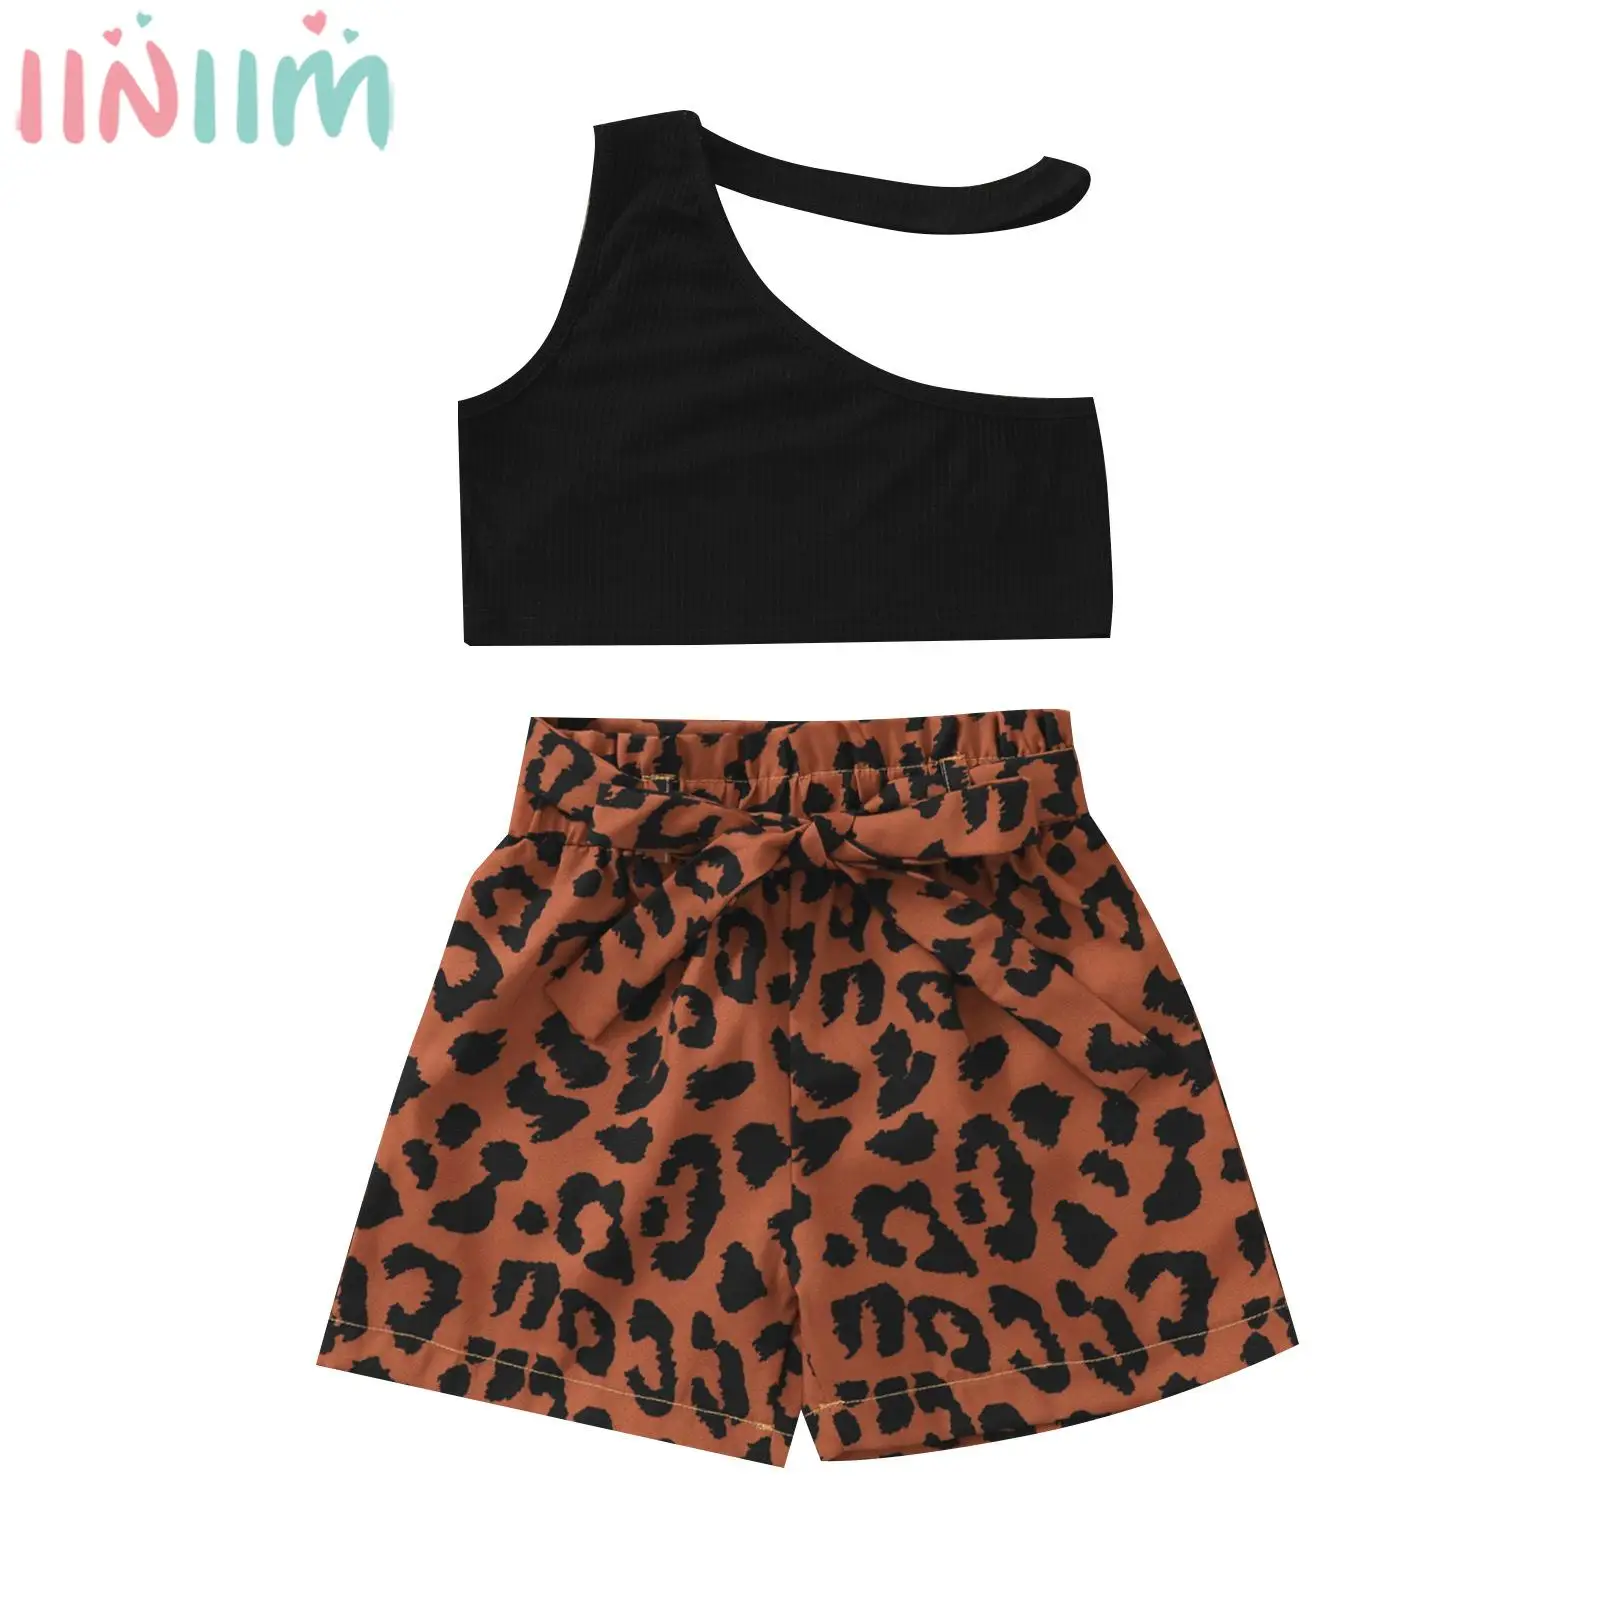 

Toddler Girls Preppy Style Outfit Set Sleeveless Oblique Shoulder Halter Crop Top with Leopard Shorts for Daily Wear Photo Shoot